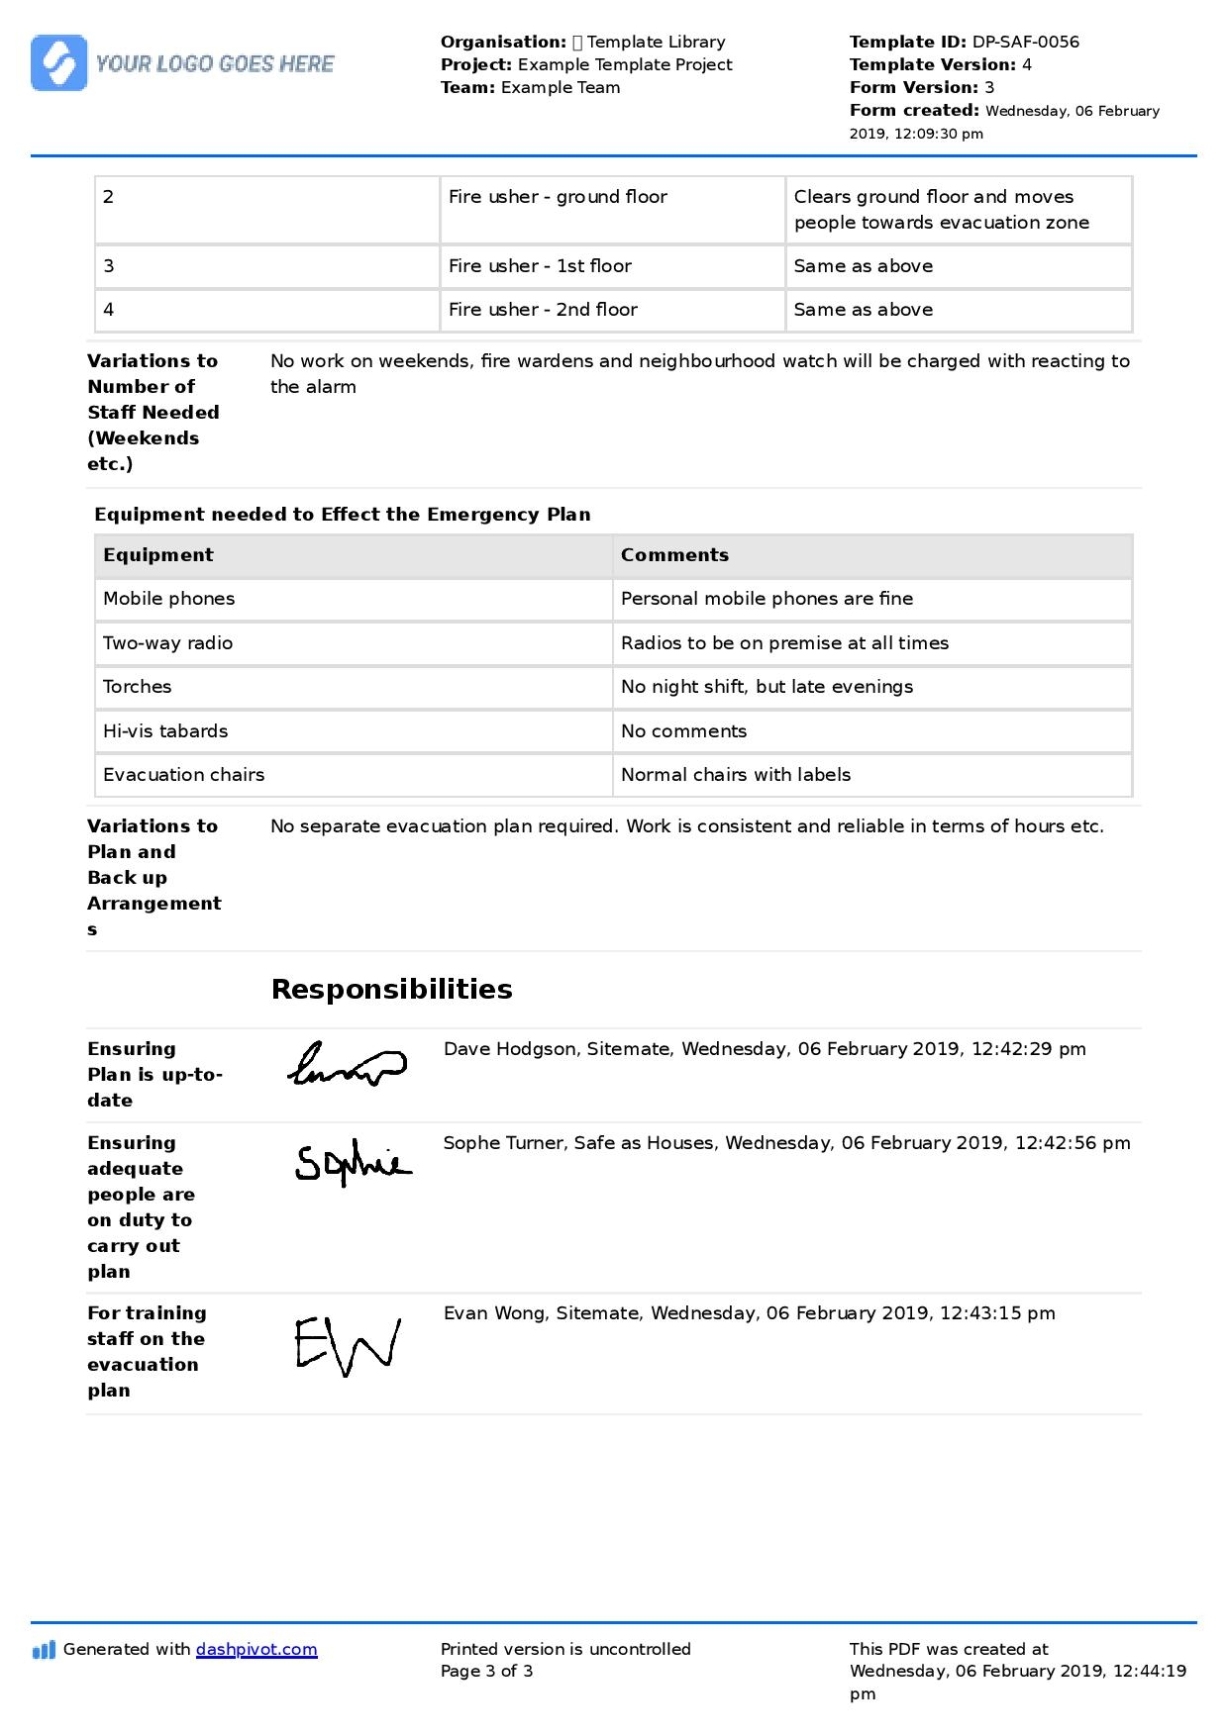 Fire Evacuation Drill Report Template inside Fire Evacuation Drill Report Template